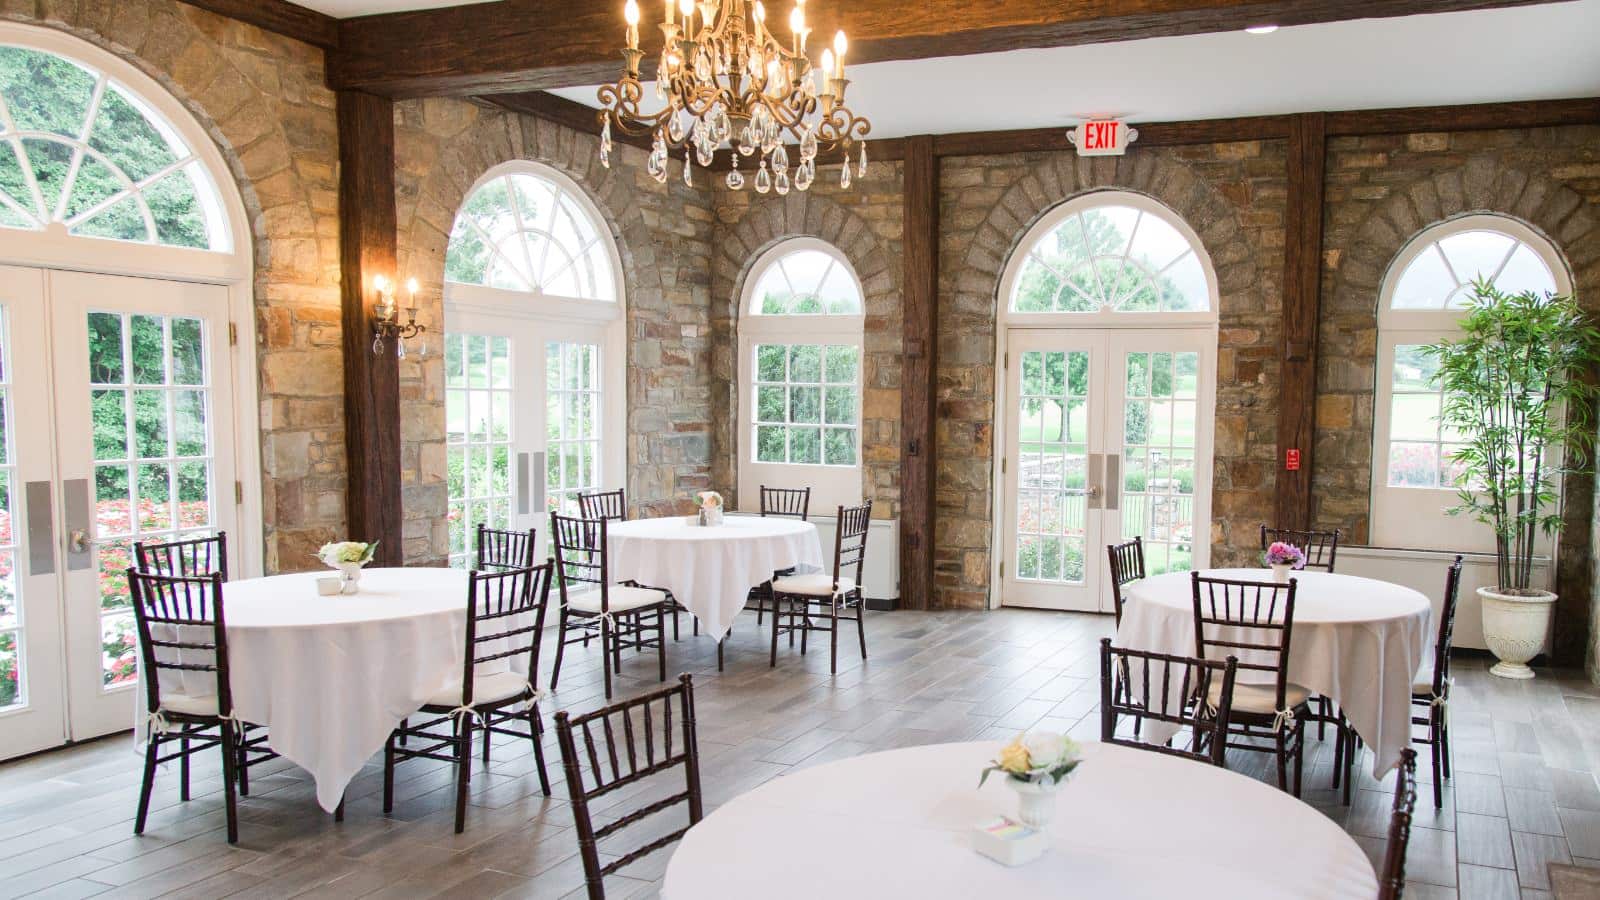 Large event area with stone brick walls, hardwood flooring, wooden tables with white tablecloths, wooden chairs, and large chandelier